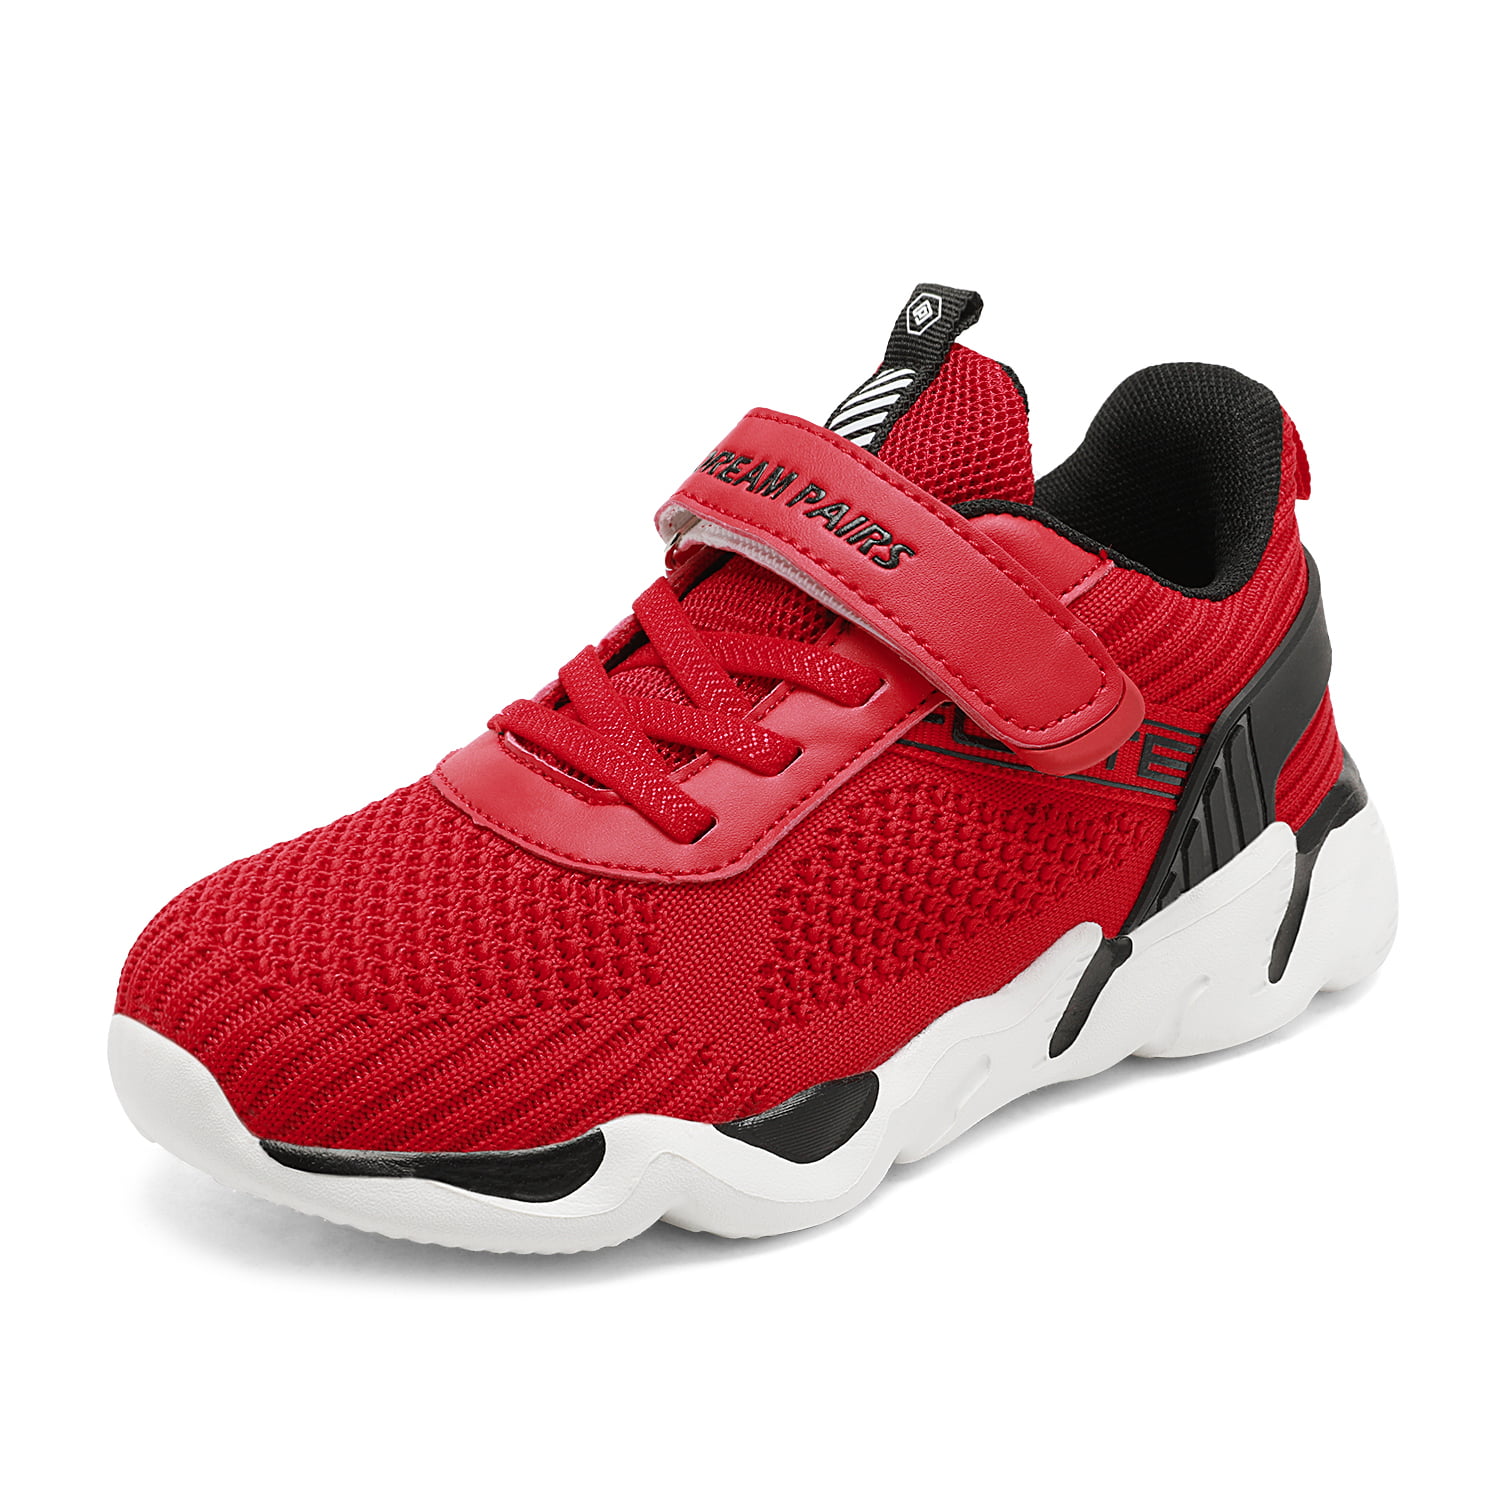 Buy > shoes for kids walmart > in stock